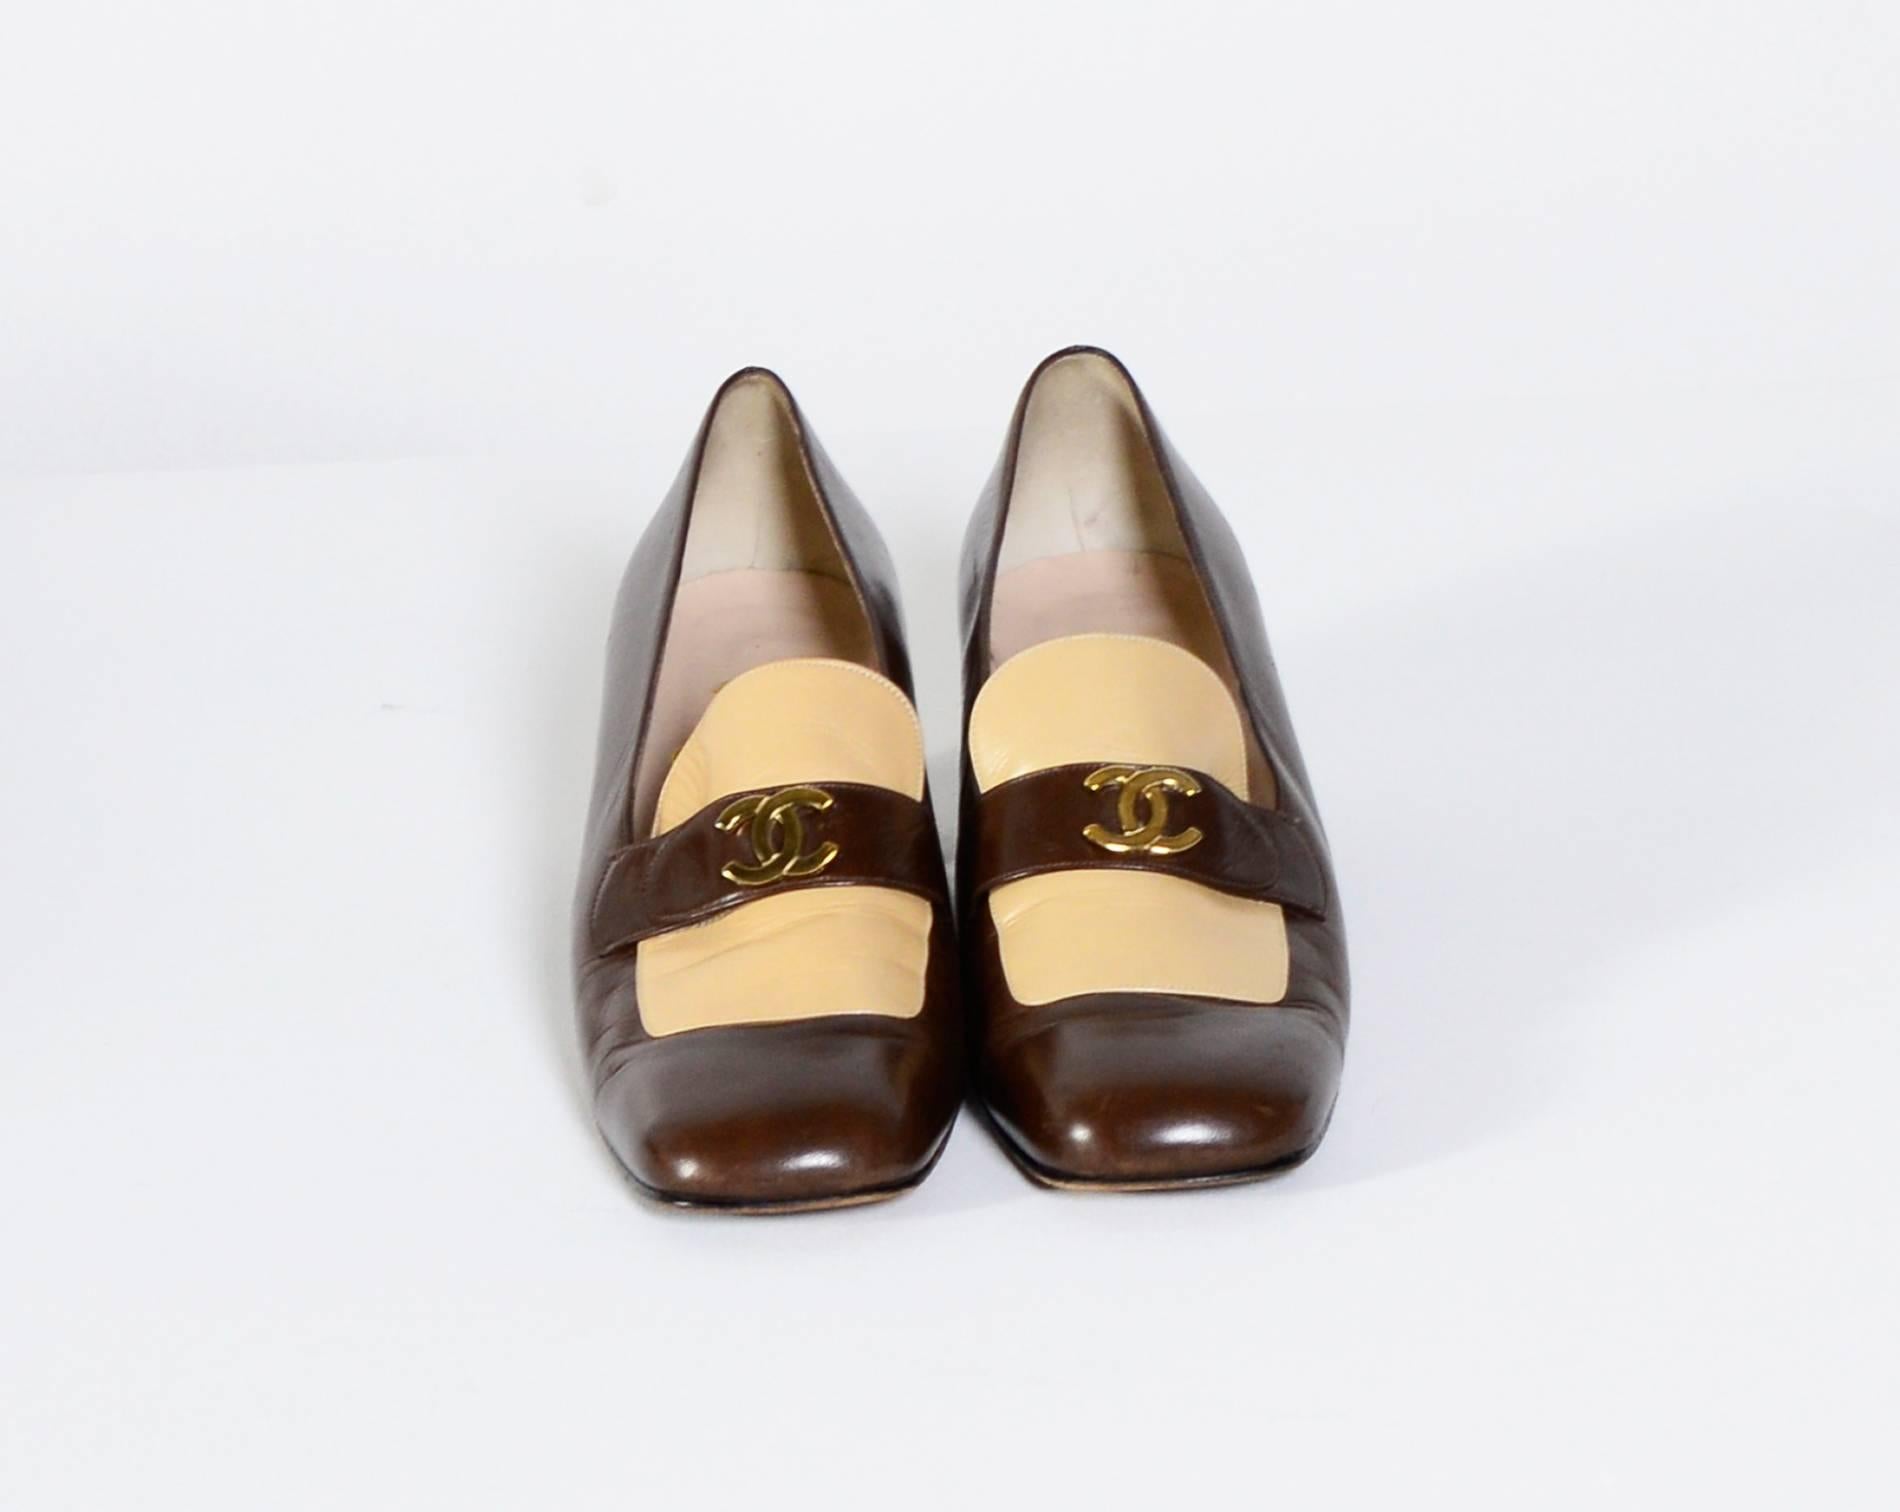 Rare pair of Chanel Pumps from the 1960's in extremely good/clean condition and wil make a great addition to any wardrobe, or any rare clothing collection.
Made in a very soft leather. Size 39
Nr C0954 F2